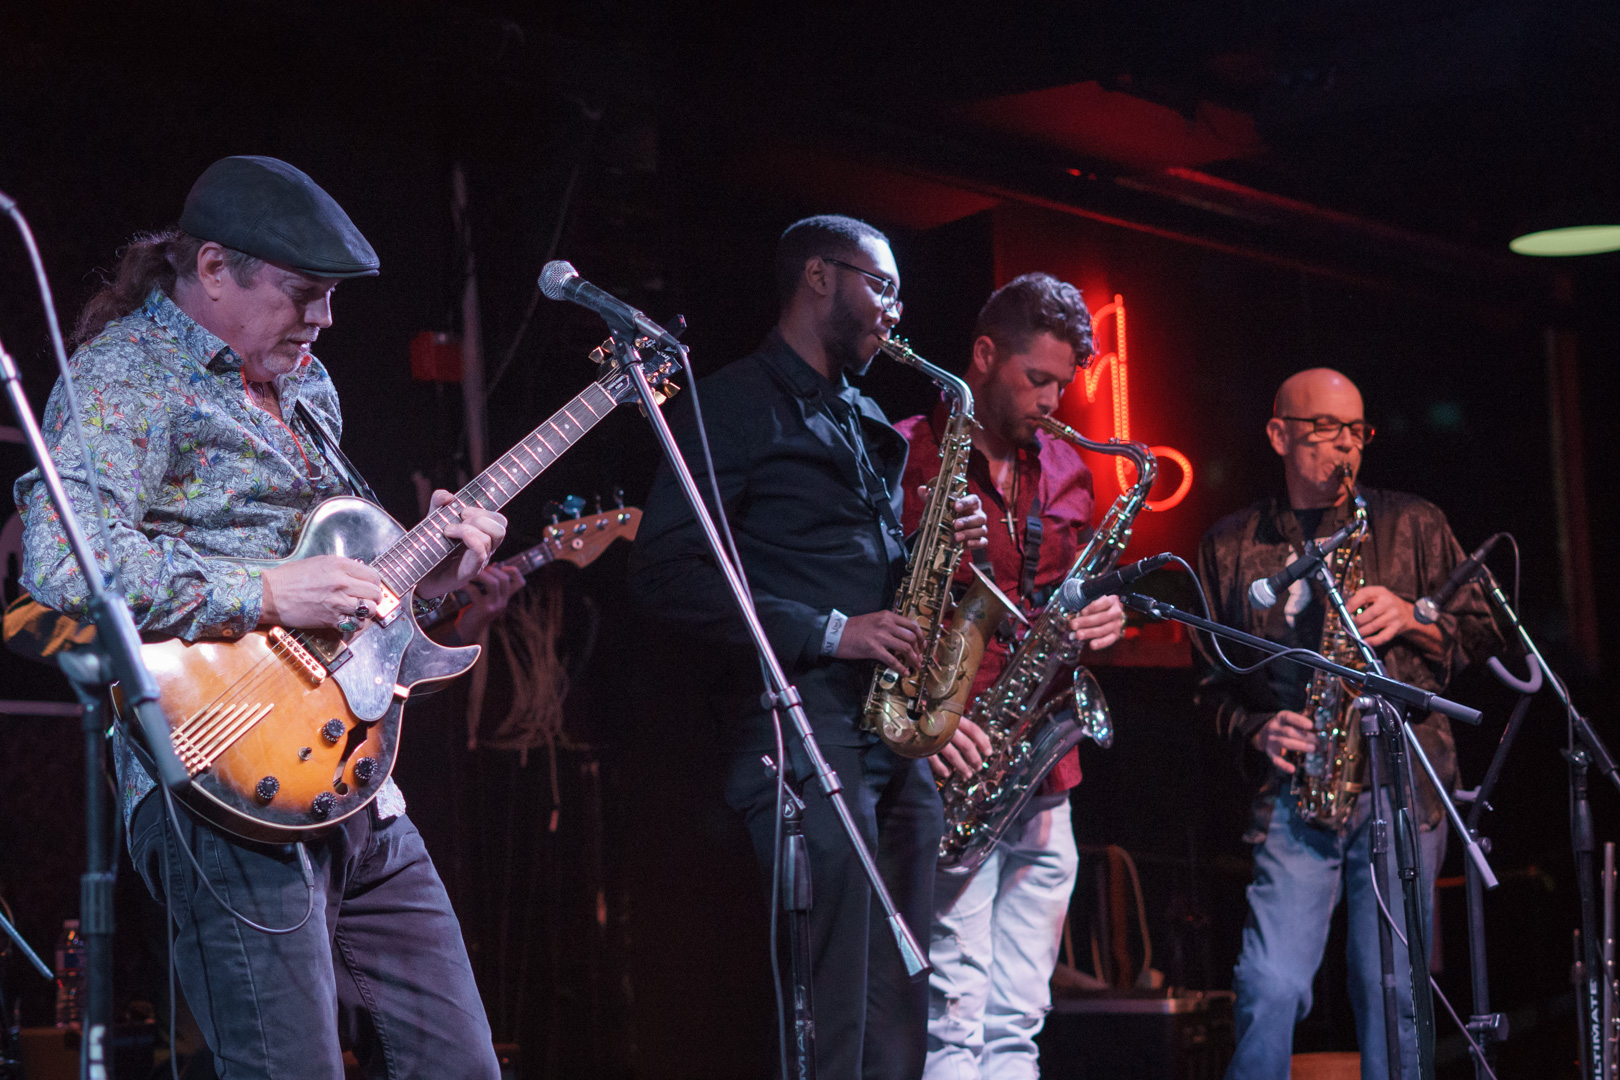 A guitar player and three saxophonists play on stage